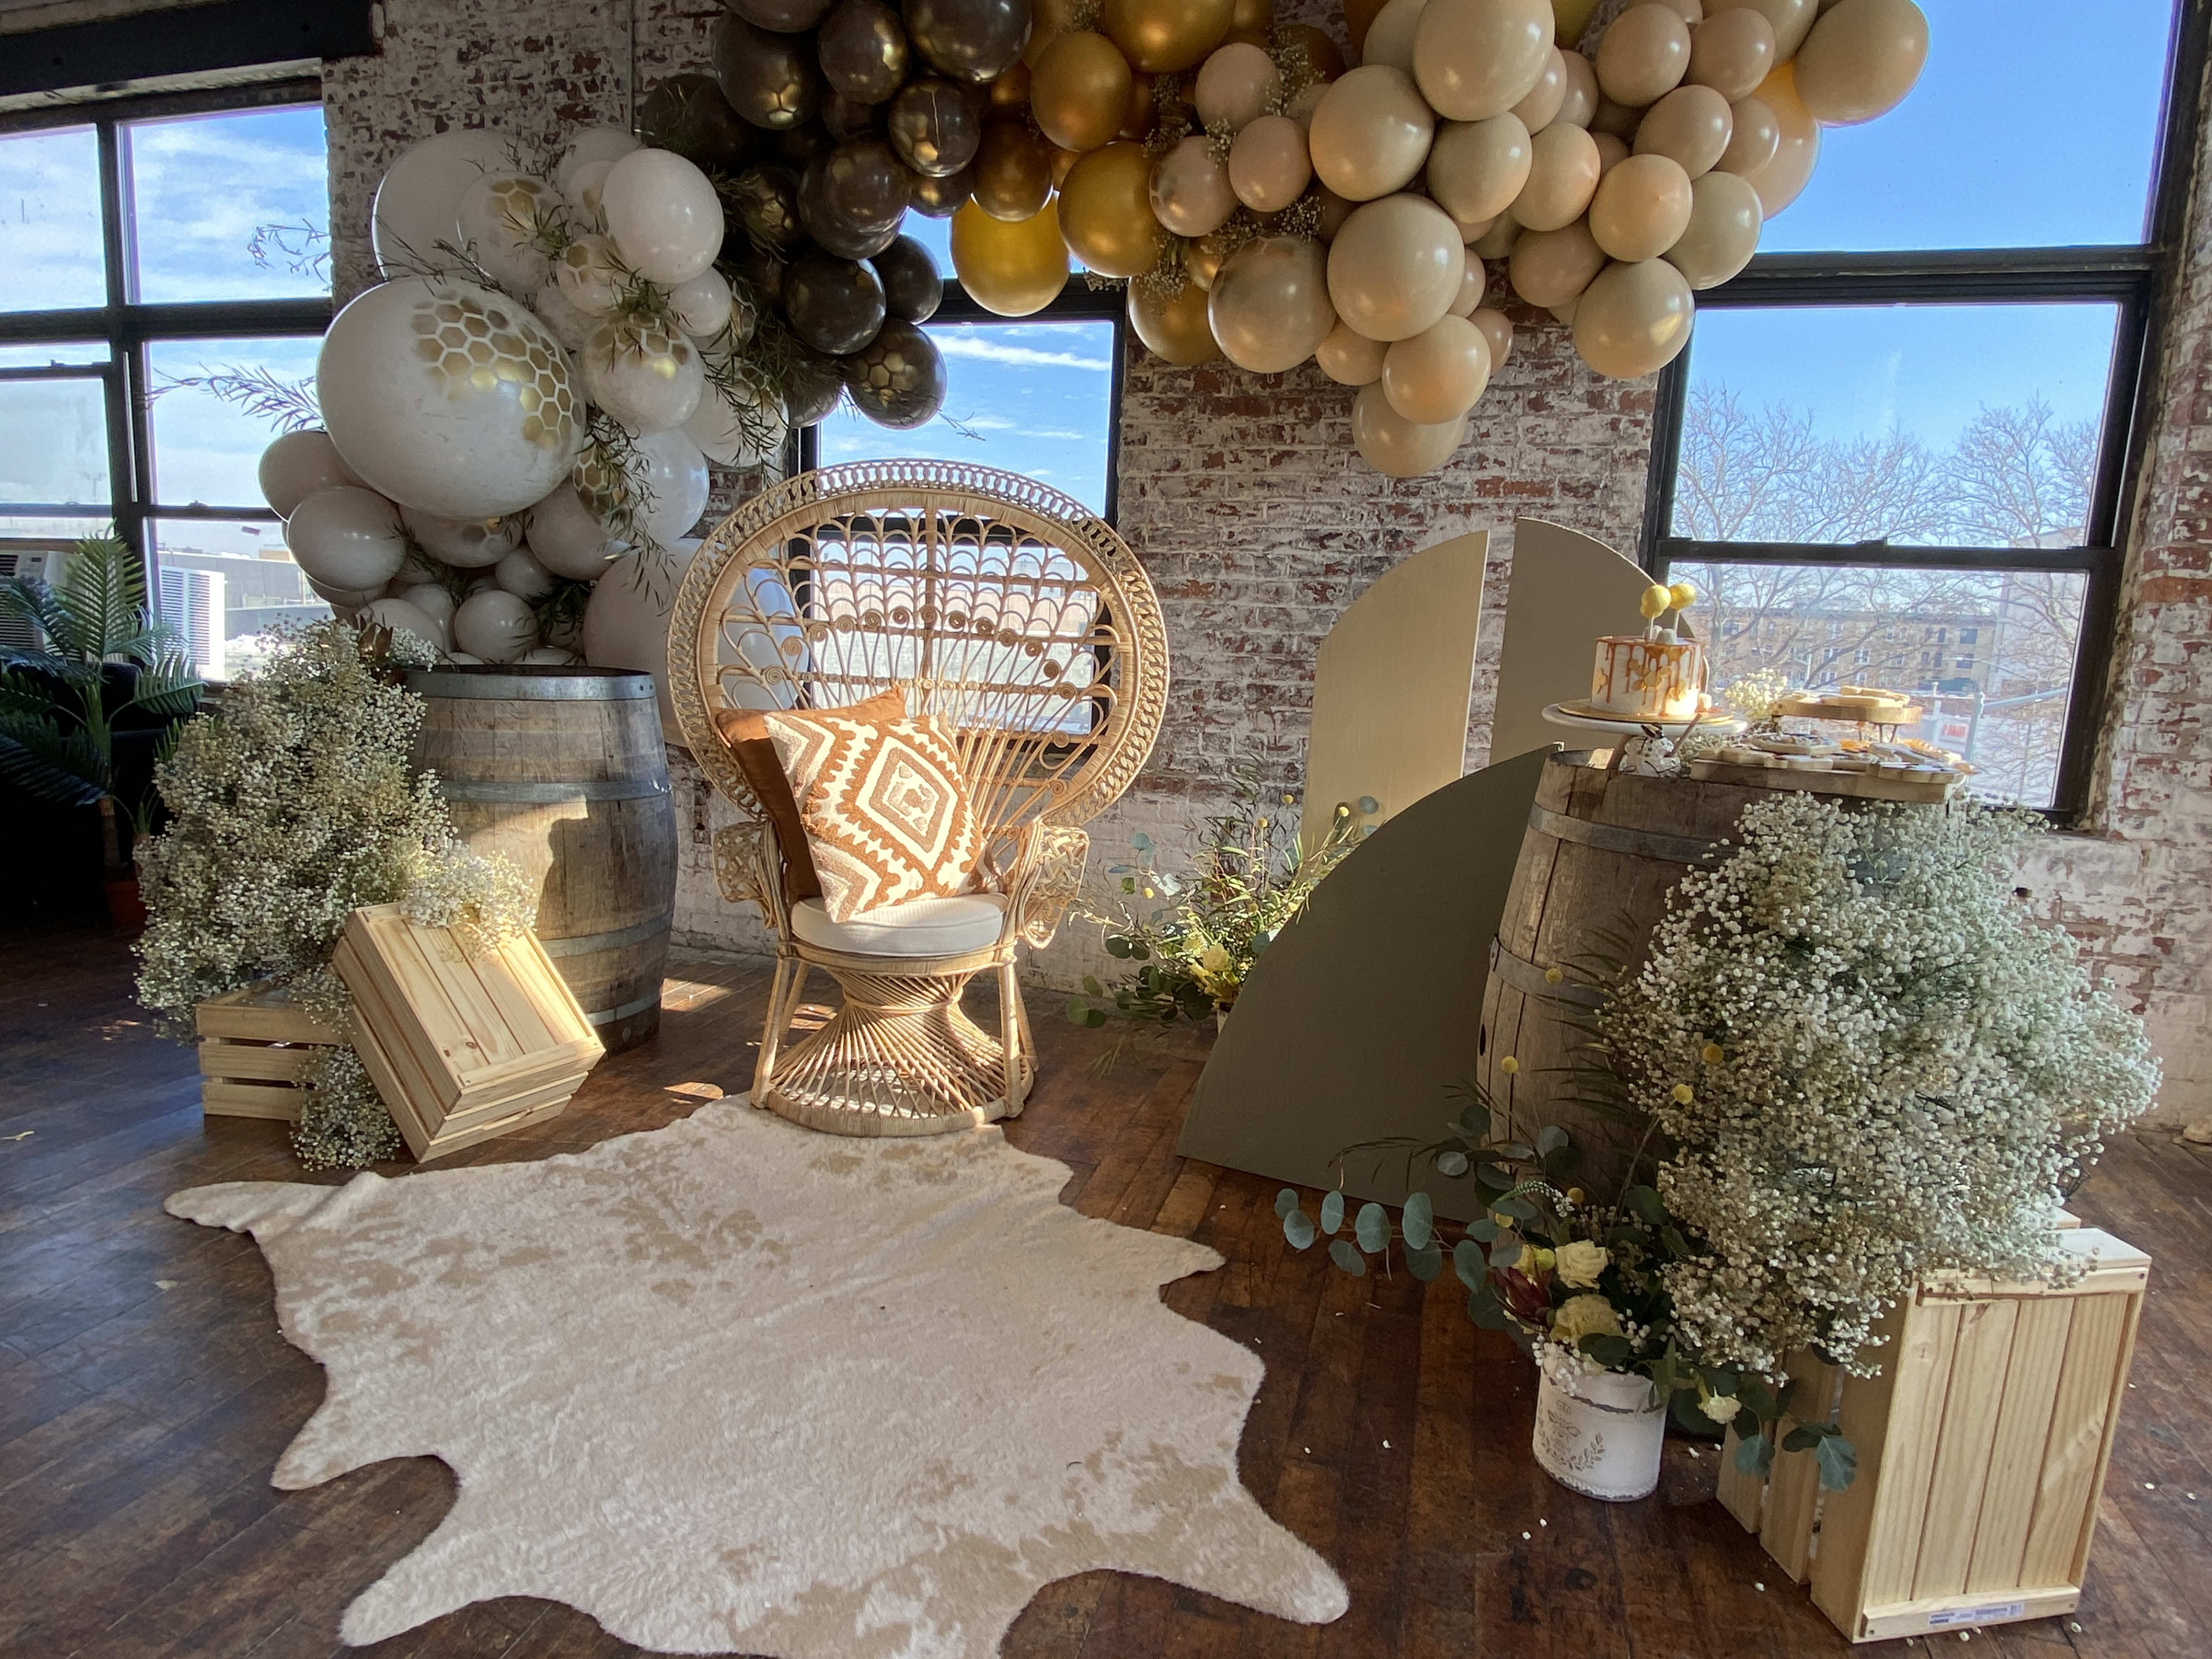 A boho-inspired room filled with beige balloons and a chair for a shower.